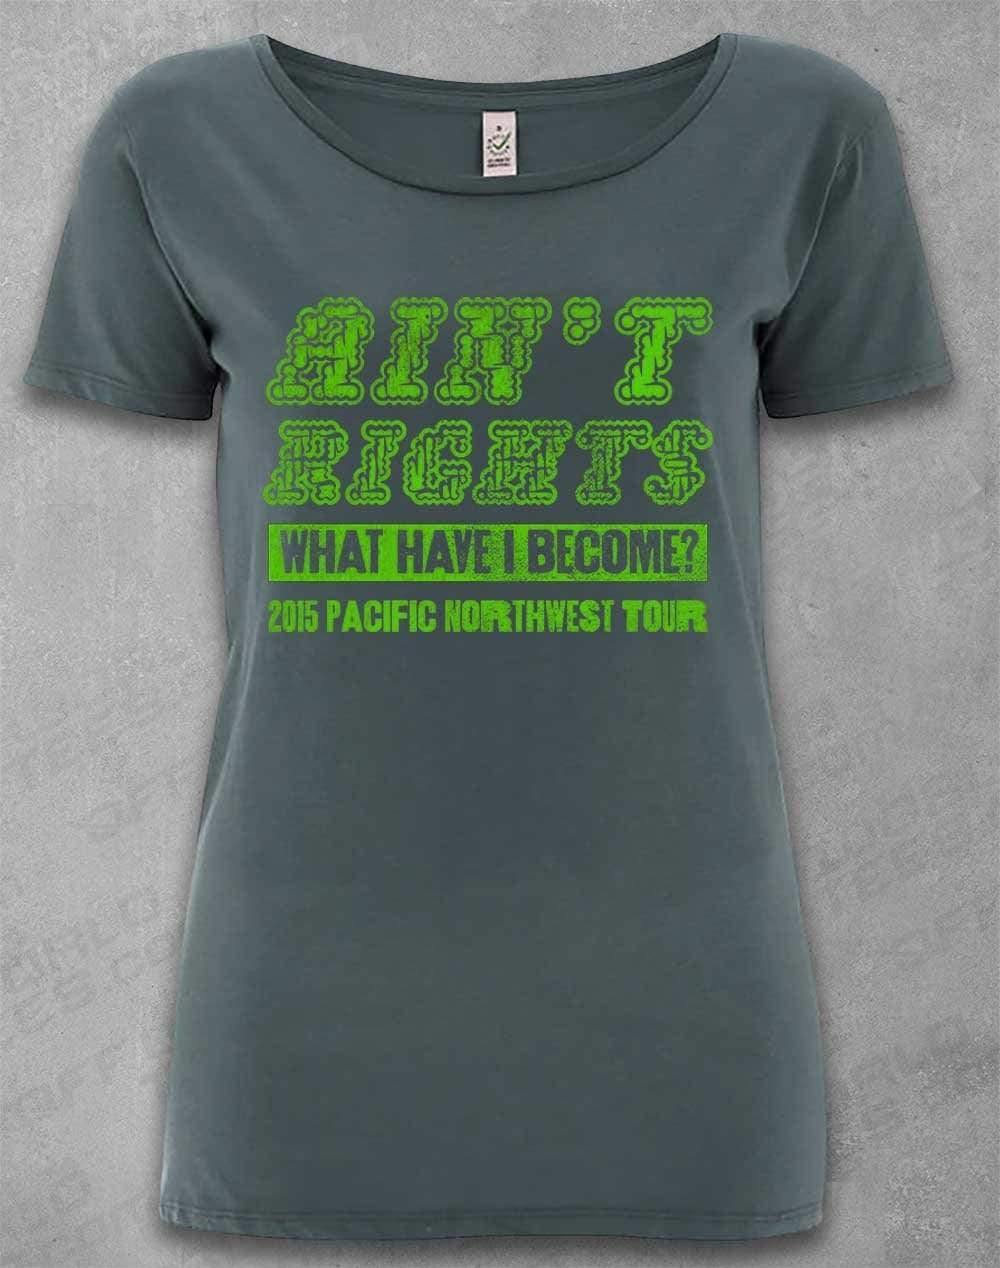 DELUXE Ain't Rights 2015 Tour Organic Scoop Neck T-Shirt 8-10 / Light Charcoal  - Off World Tees